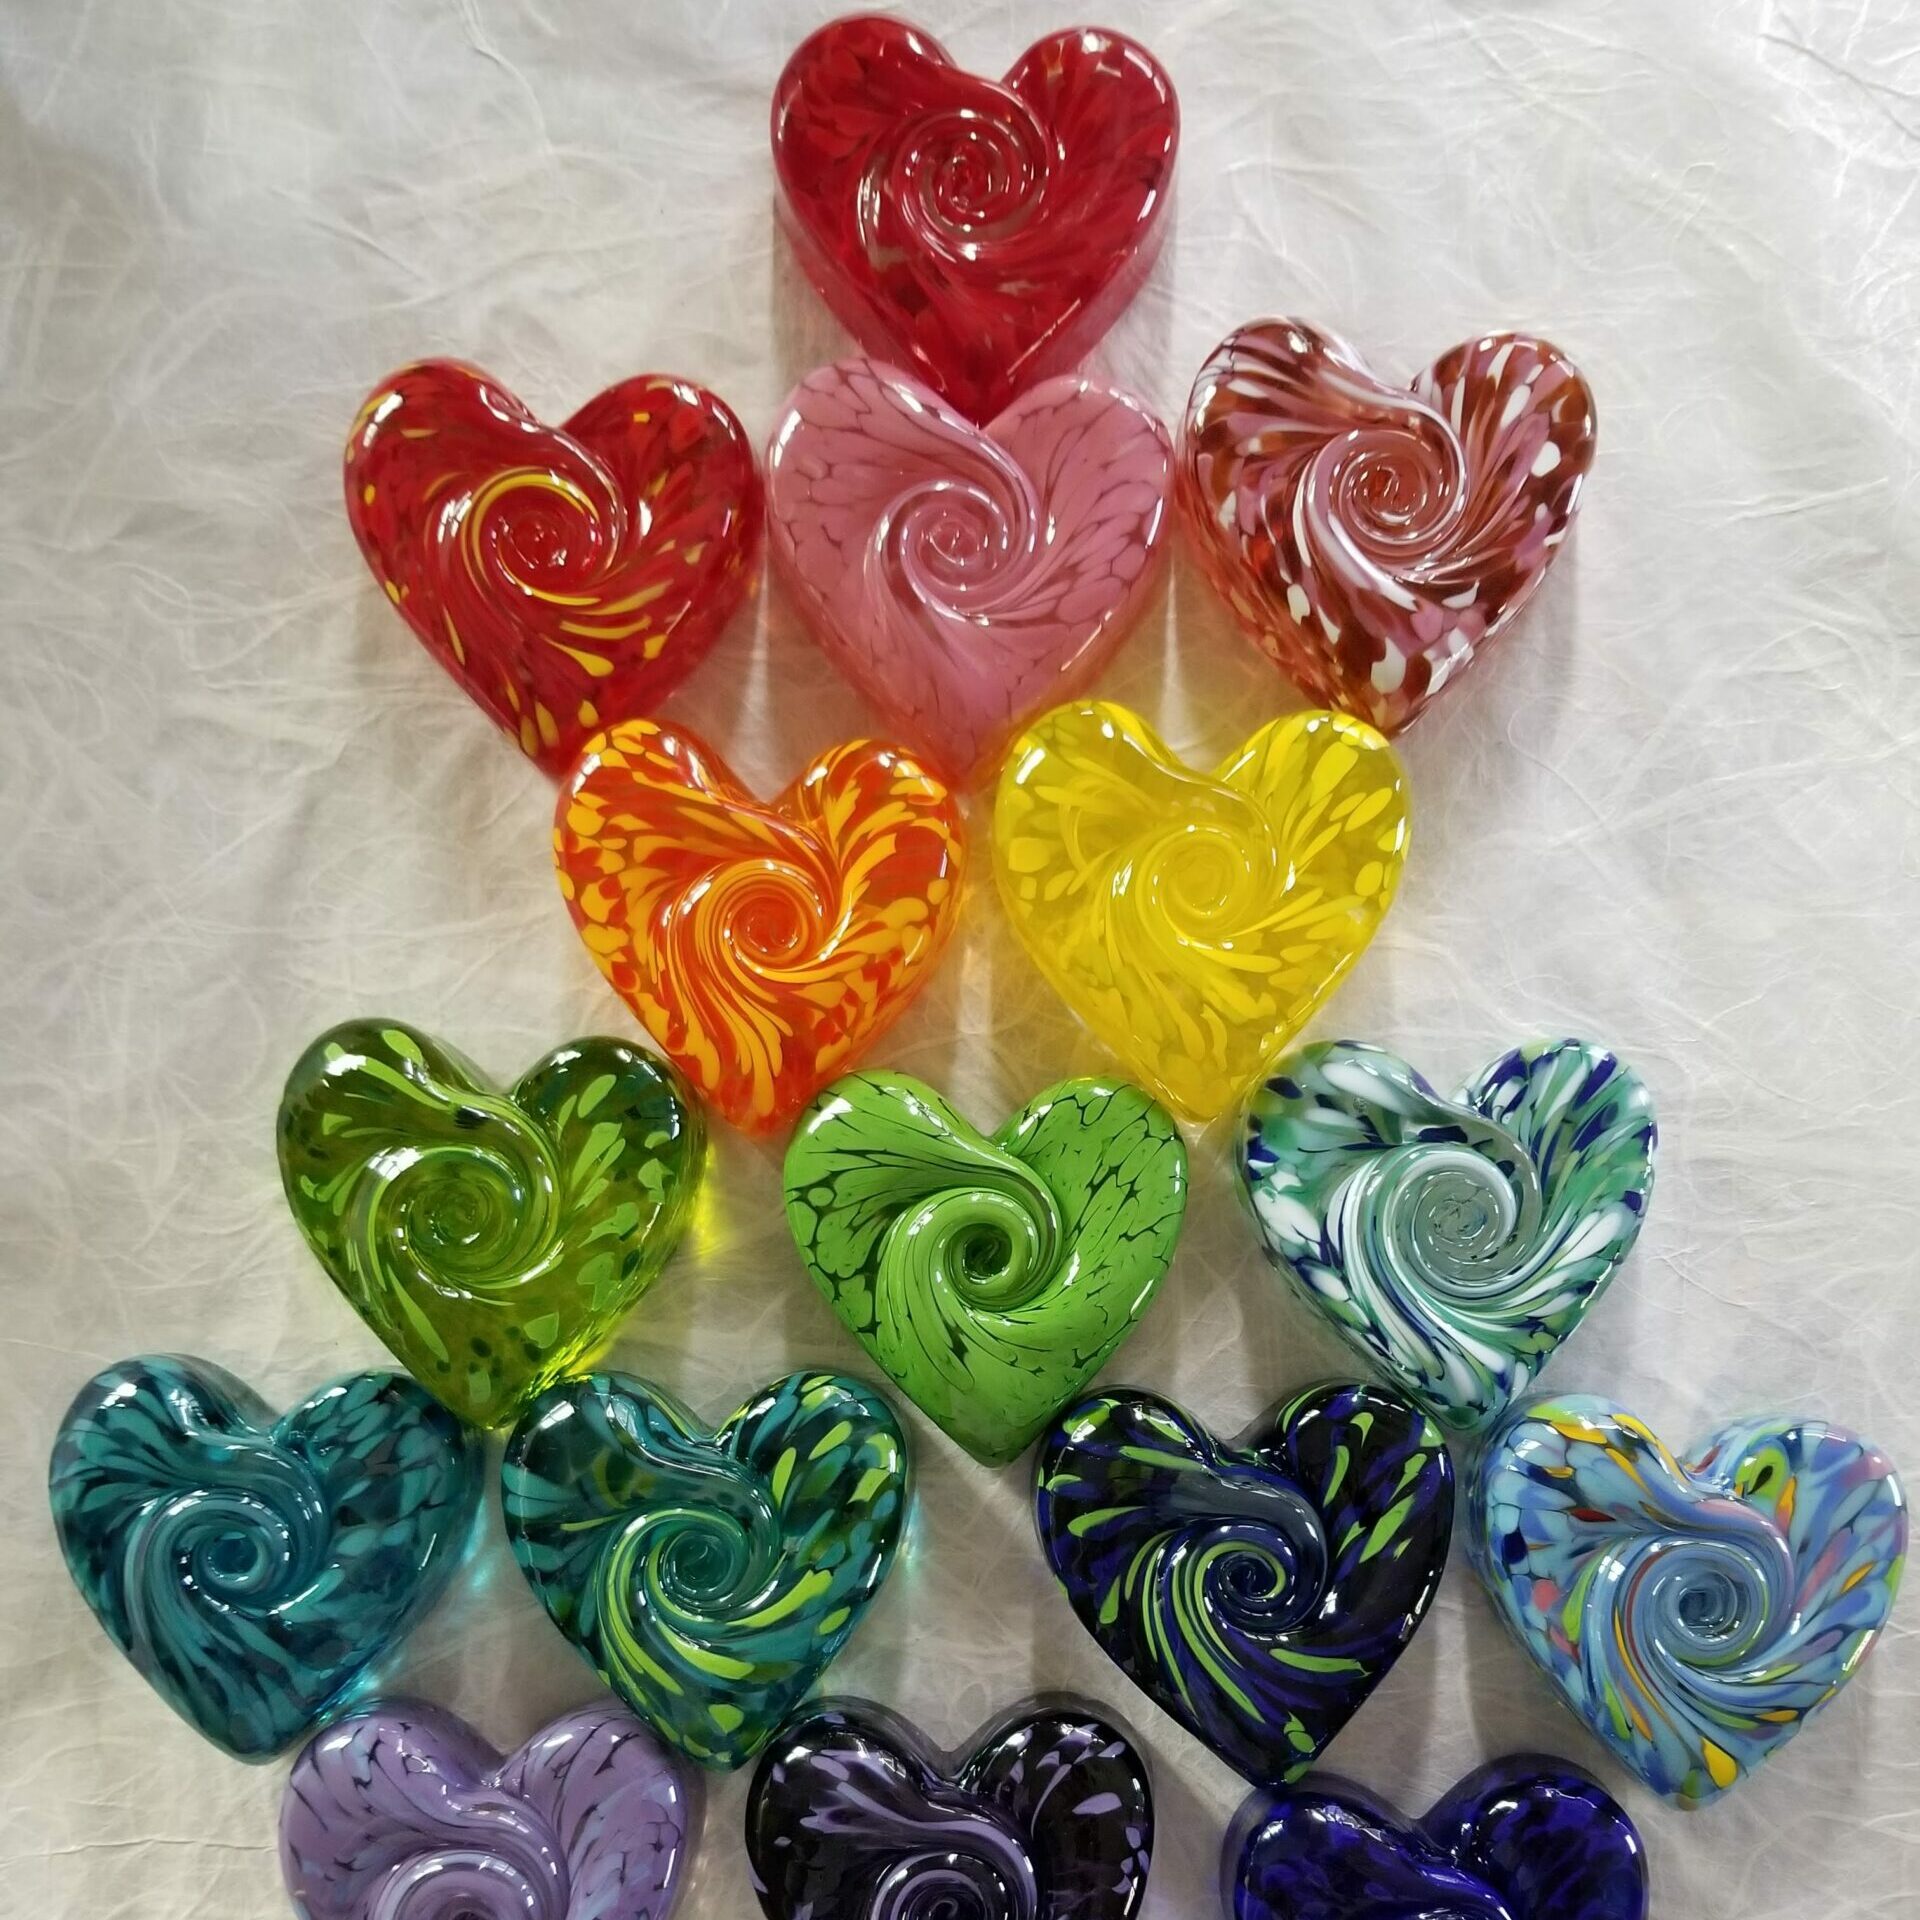 photo of handmade glass heart paperweights in every color of the rainbow by kobo art garden in pike place market